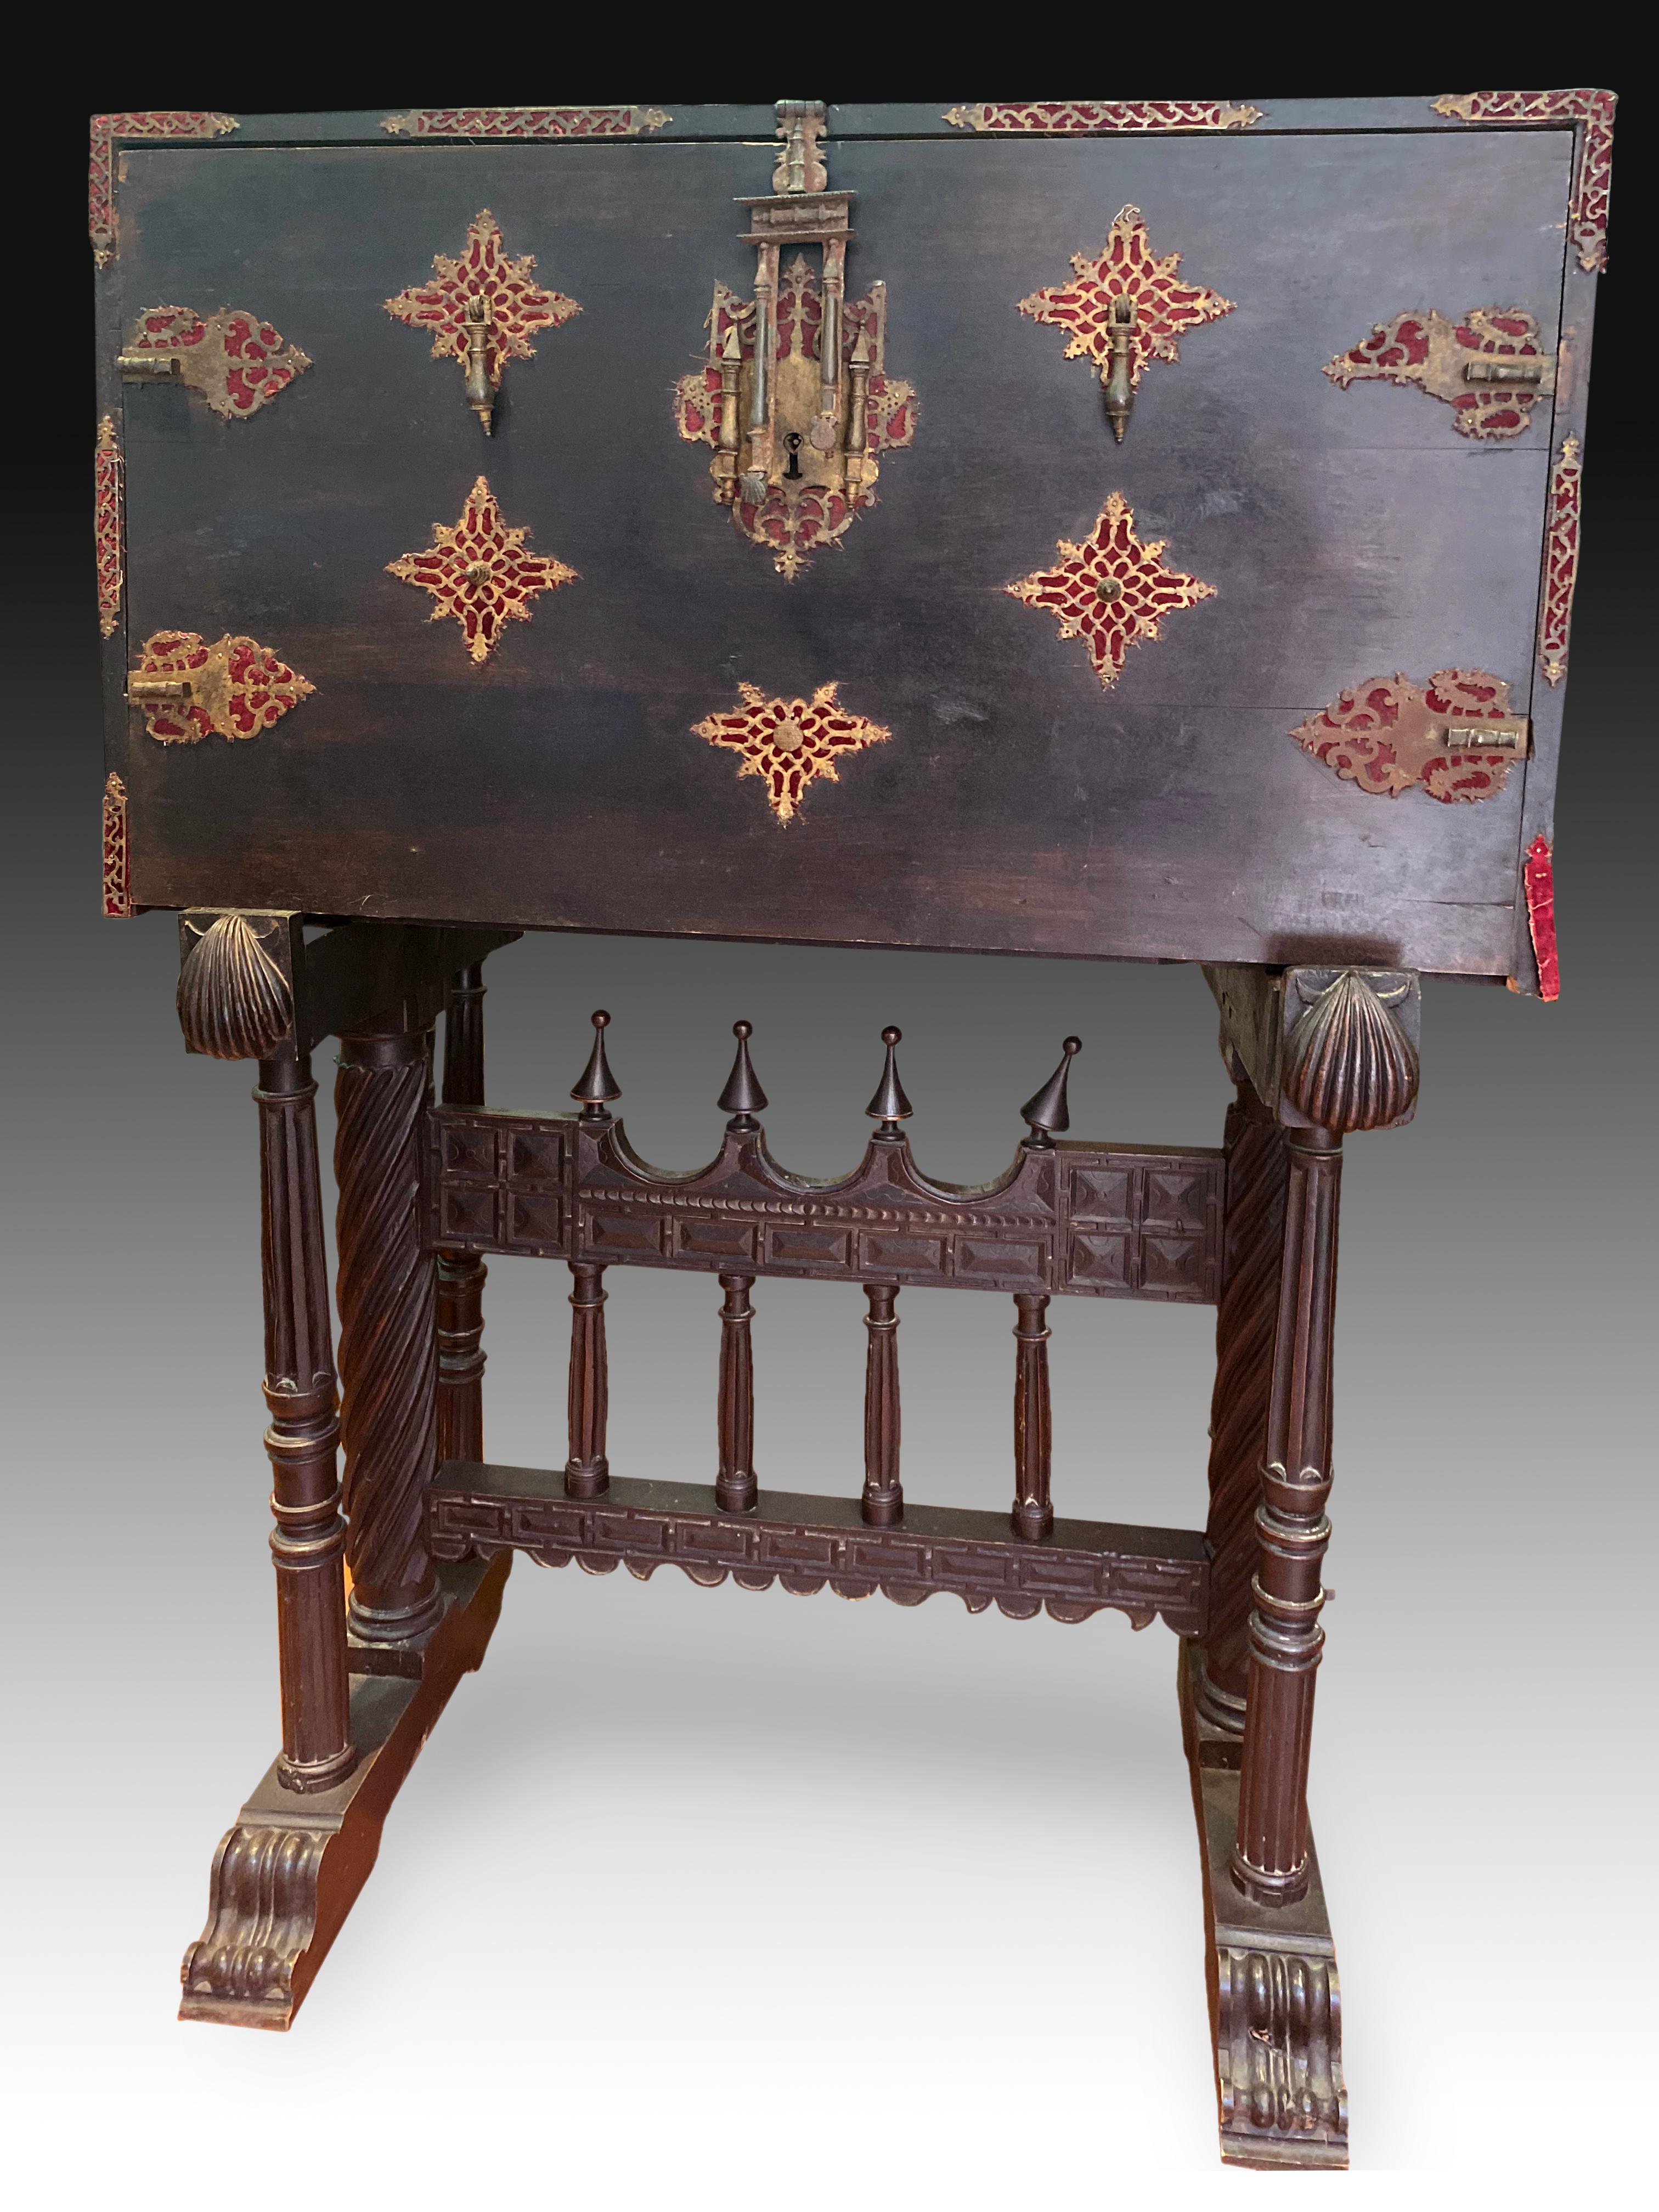 Castillian desk with pedestal. Walnut, wrought iron, etc. Spain, 17th century with restorations (after that date). 
Castilian Bargueño with foot of bridge. Walnut, wrought iron. Spain, 17th century with restorations.
Requires